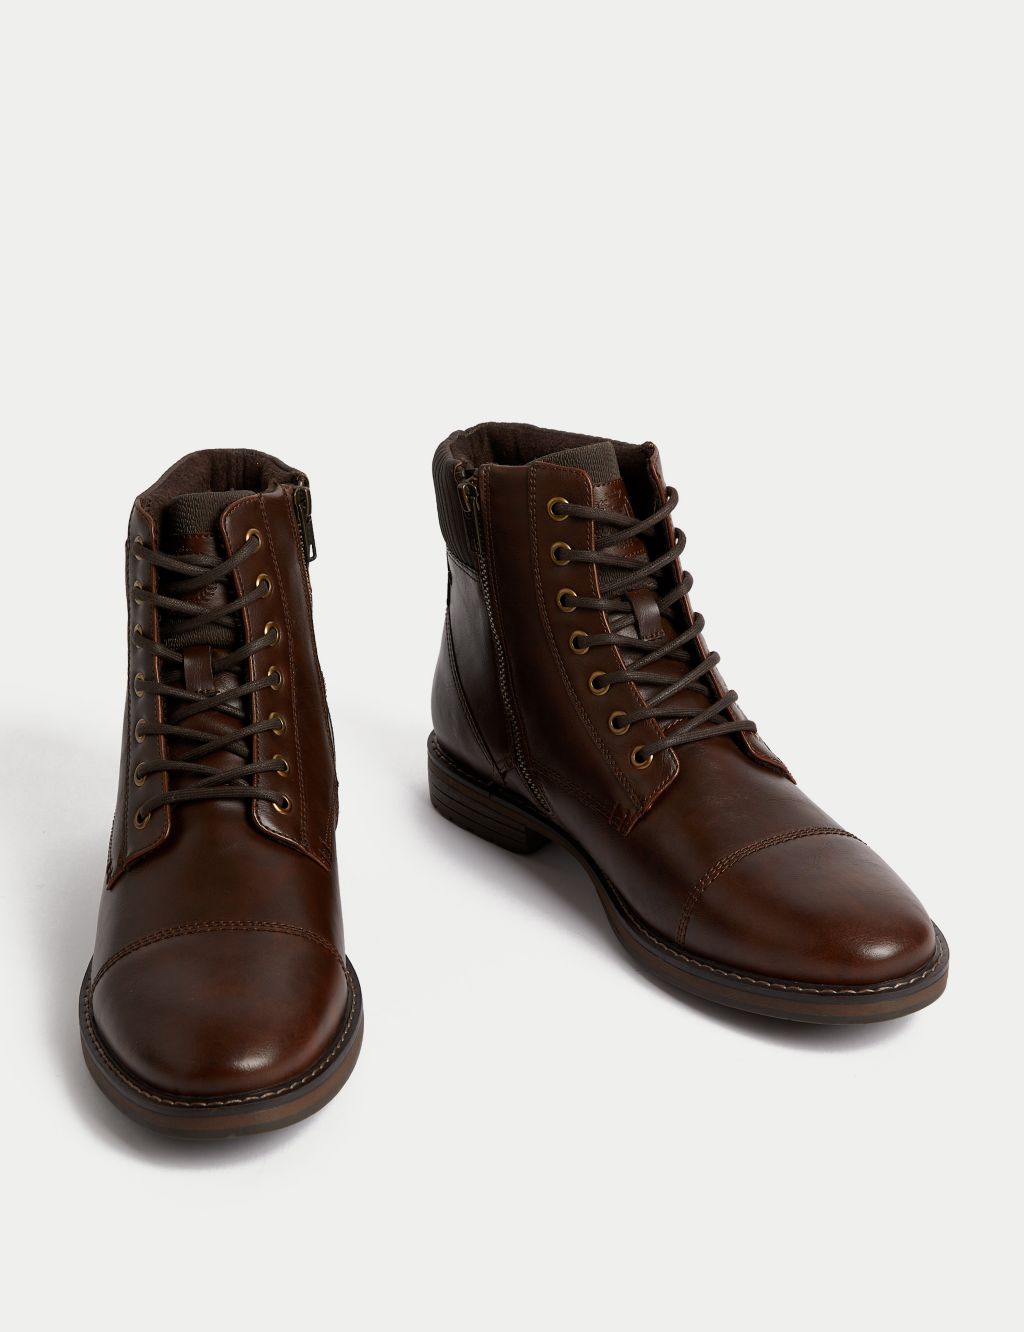 Military Side Zip Casual Boots image 2